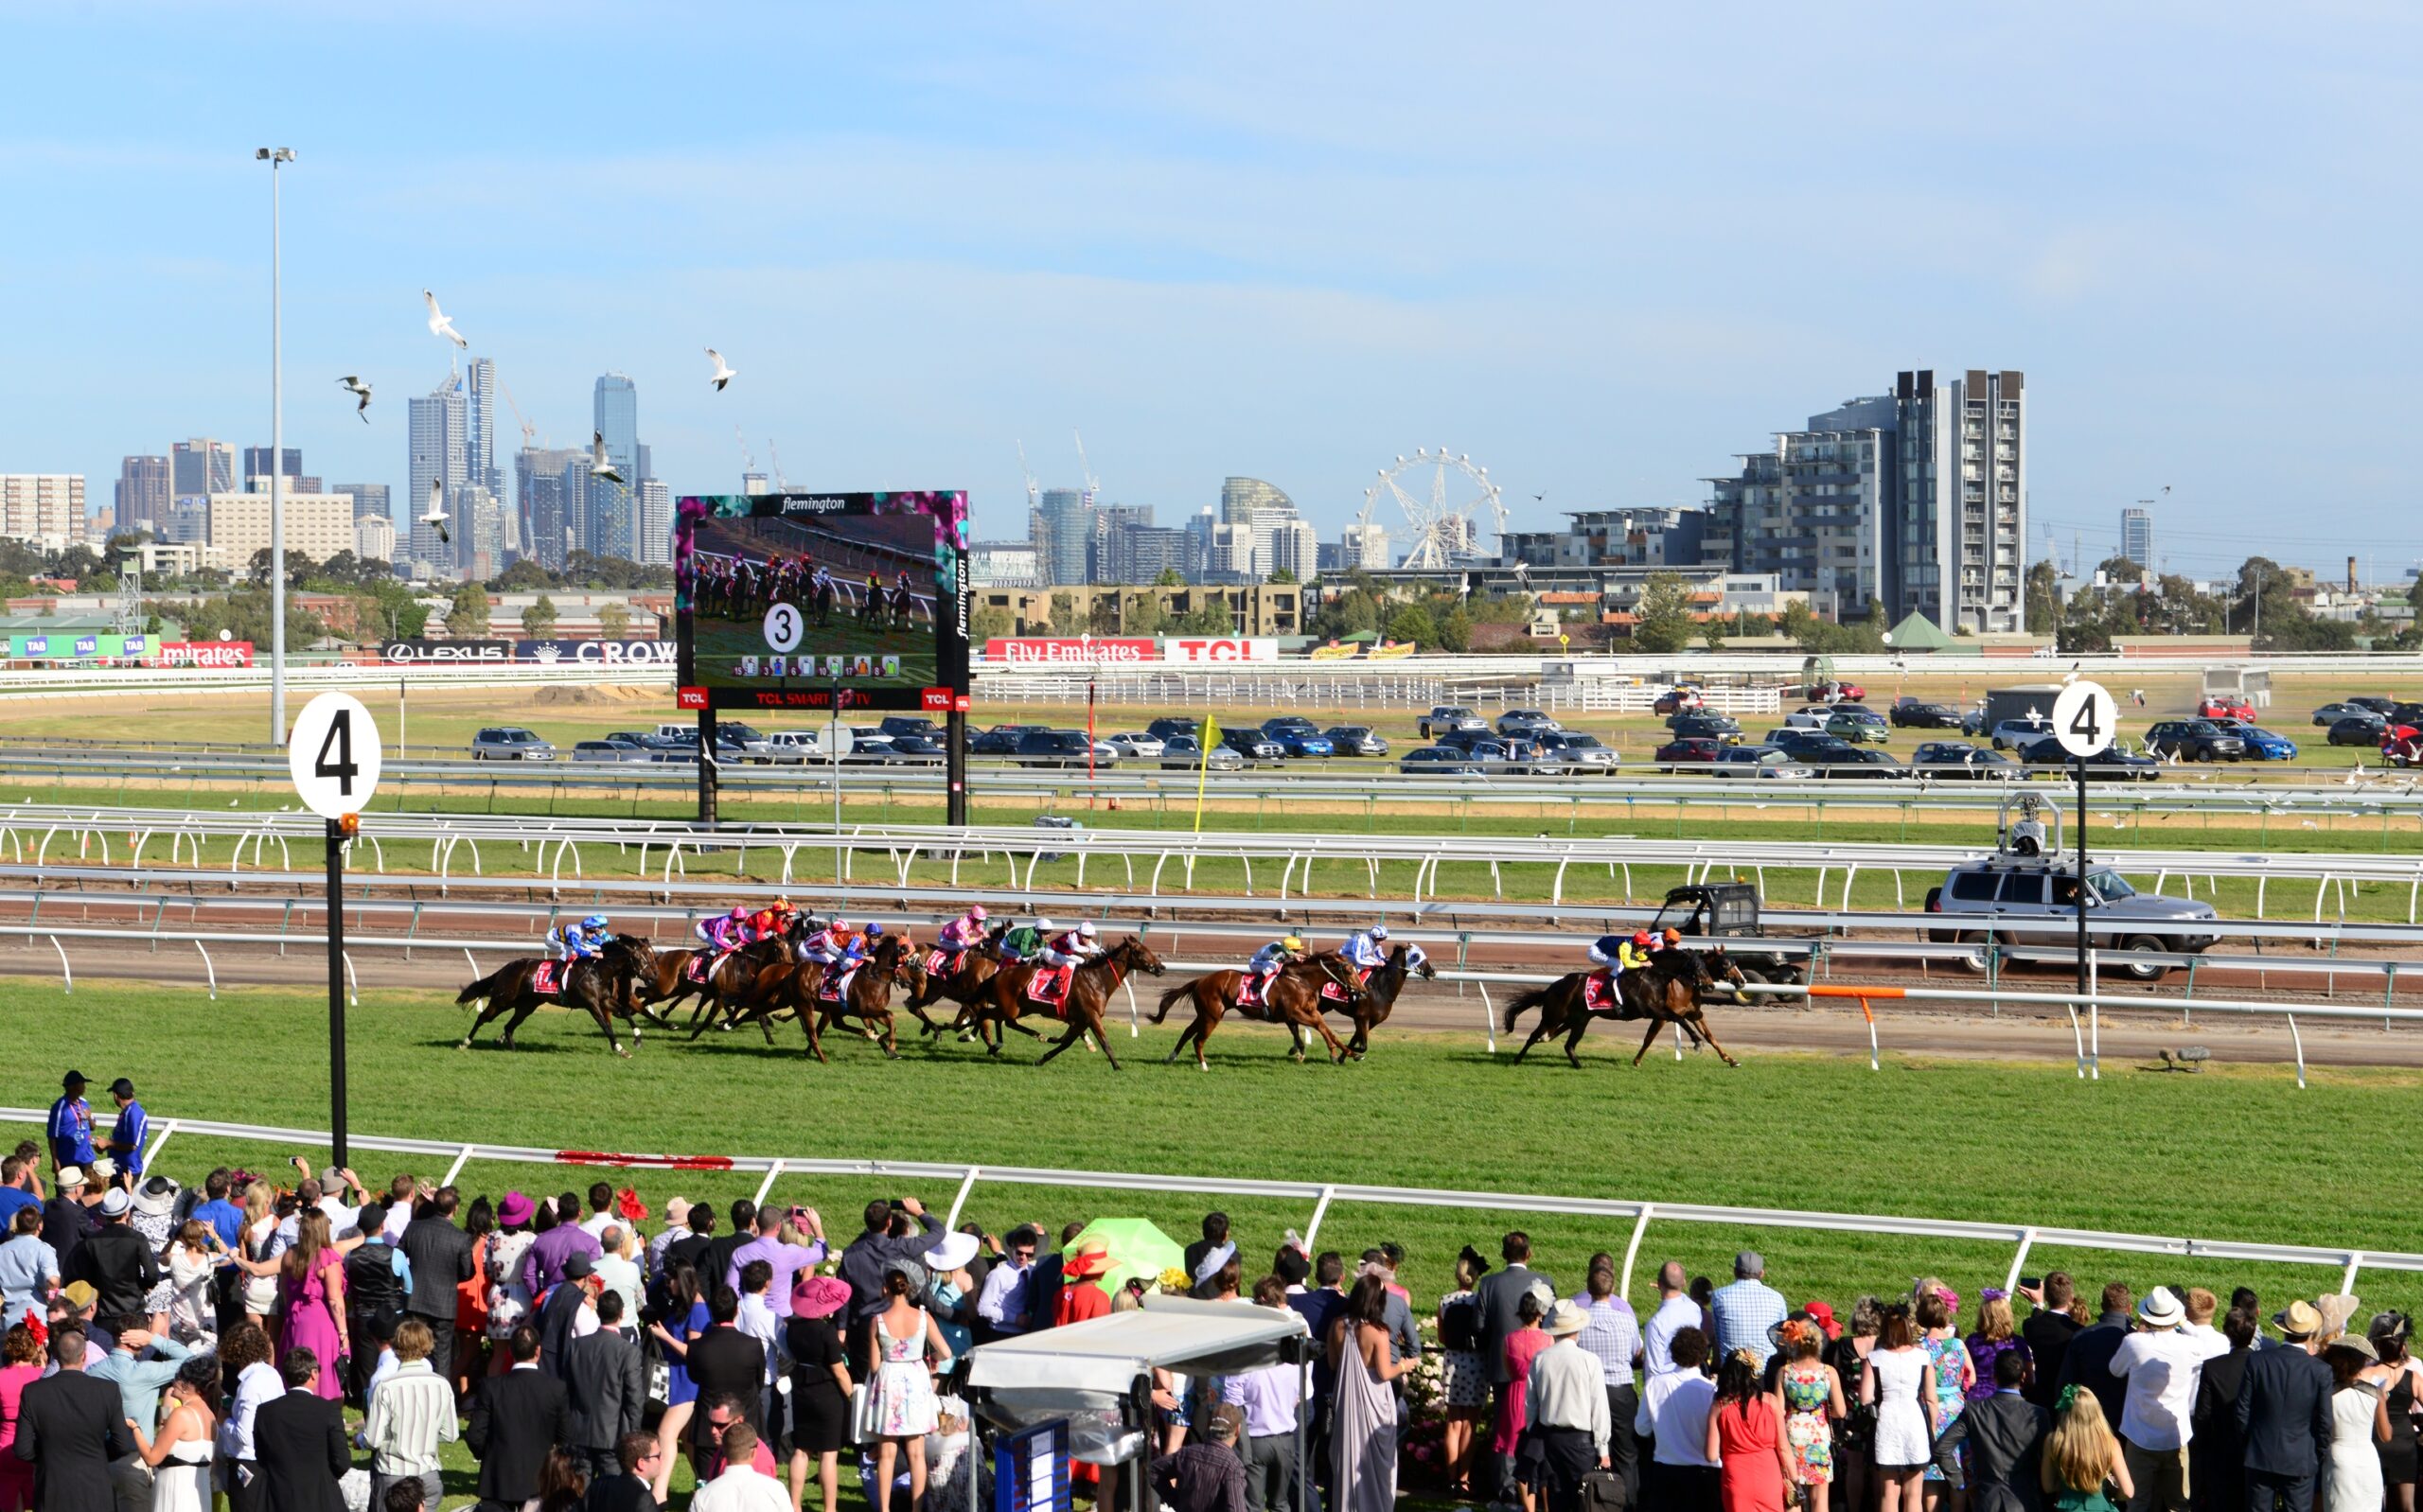 Melbourne Cup 2022 Live, TV Channel, Preview and How to watch